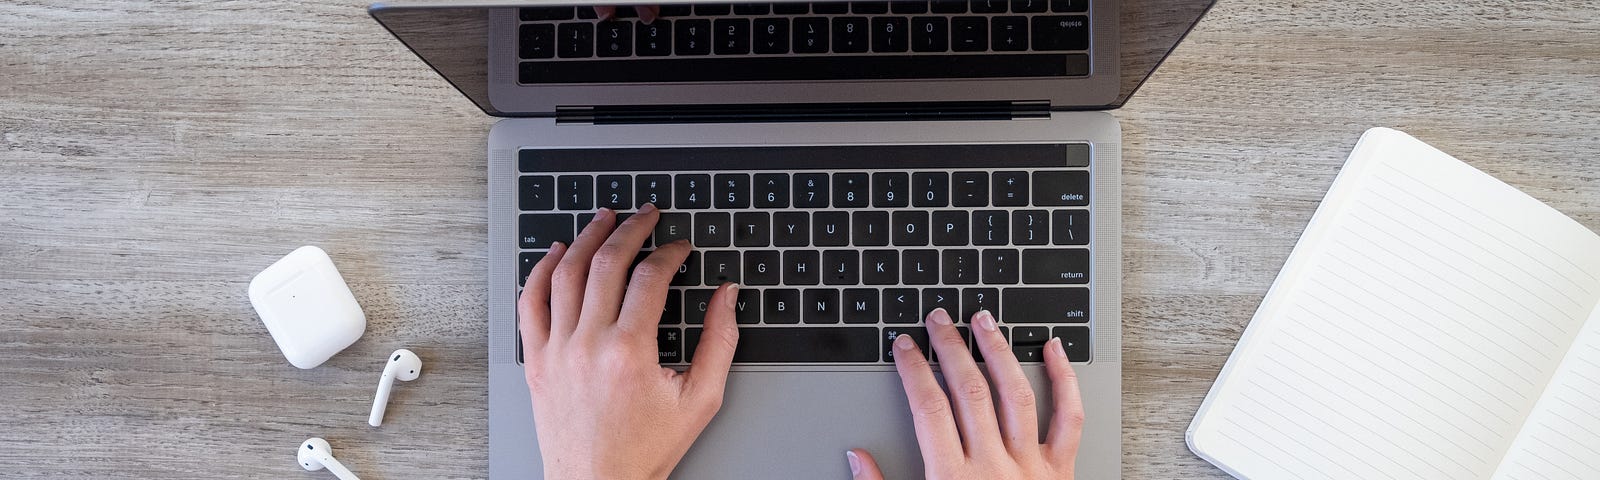 Hands typing on a laptop keyboard representing starting an online business